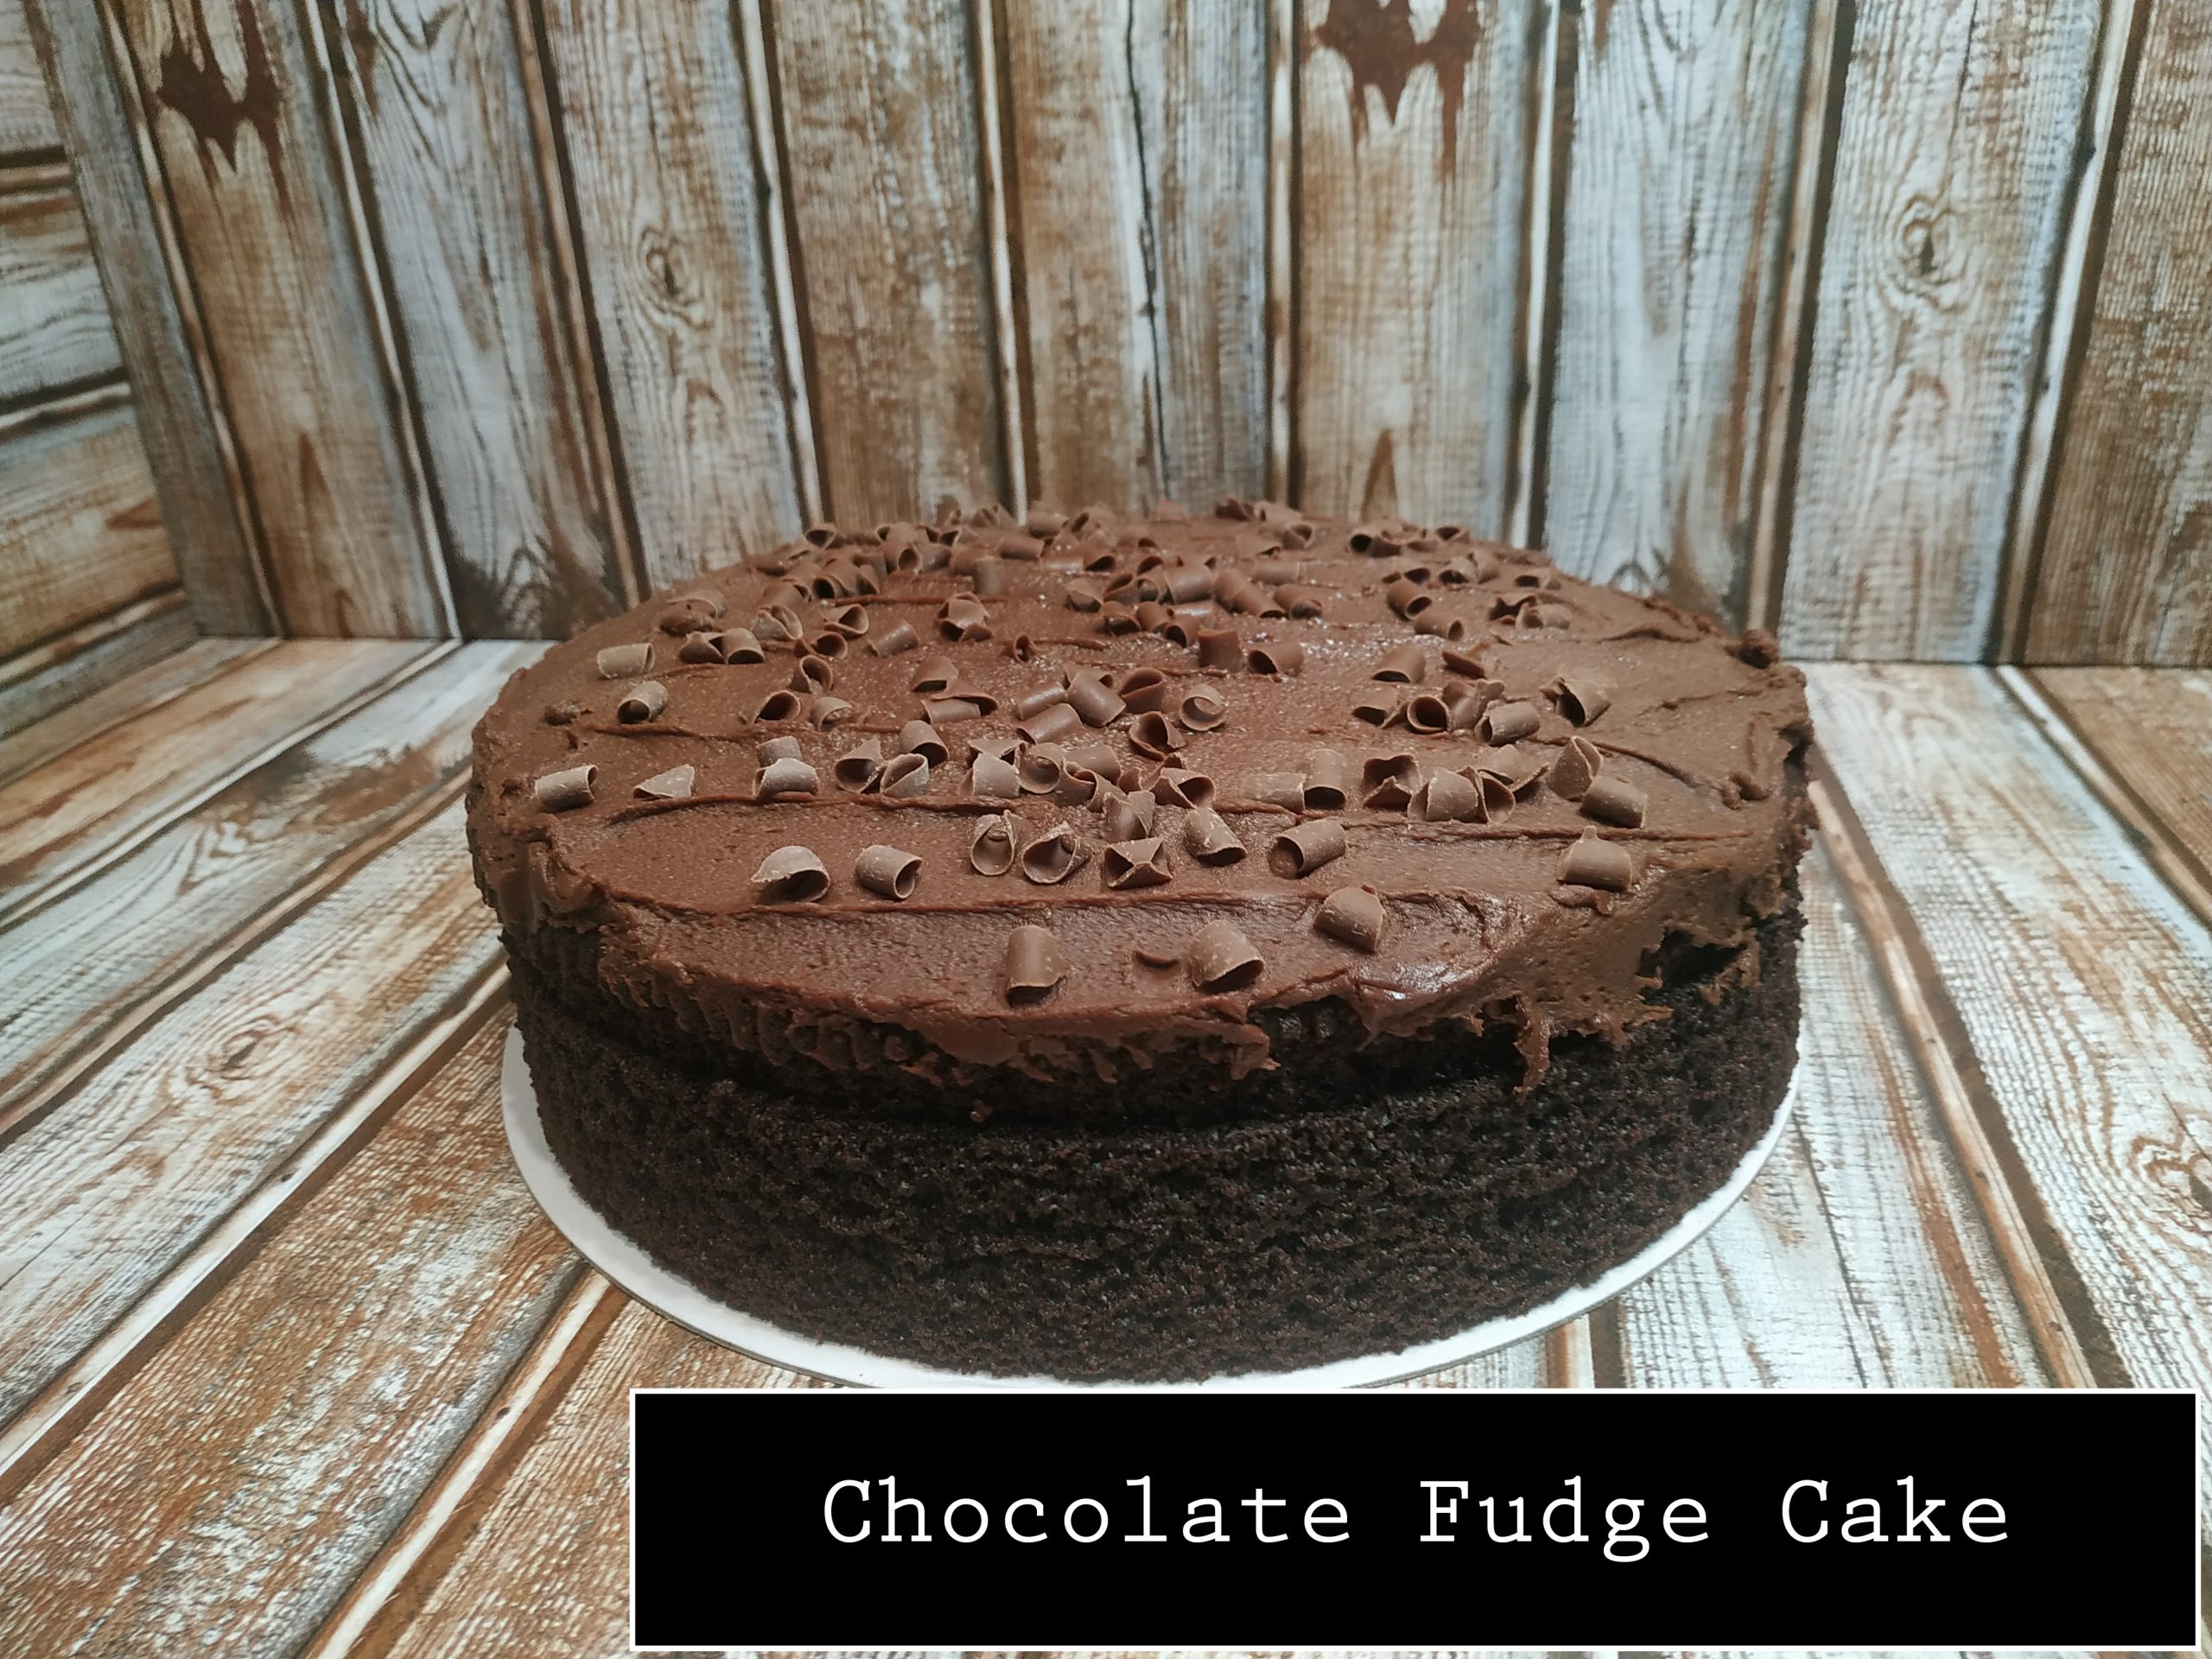 Chocolate fudge cake by Sandwich in the Square